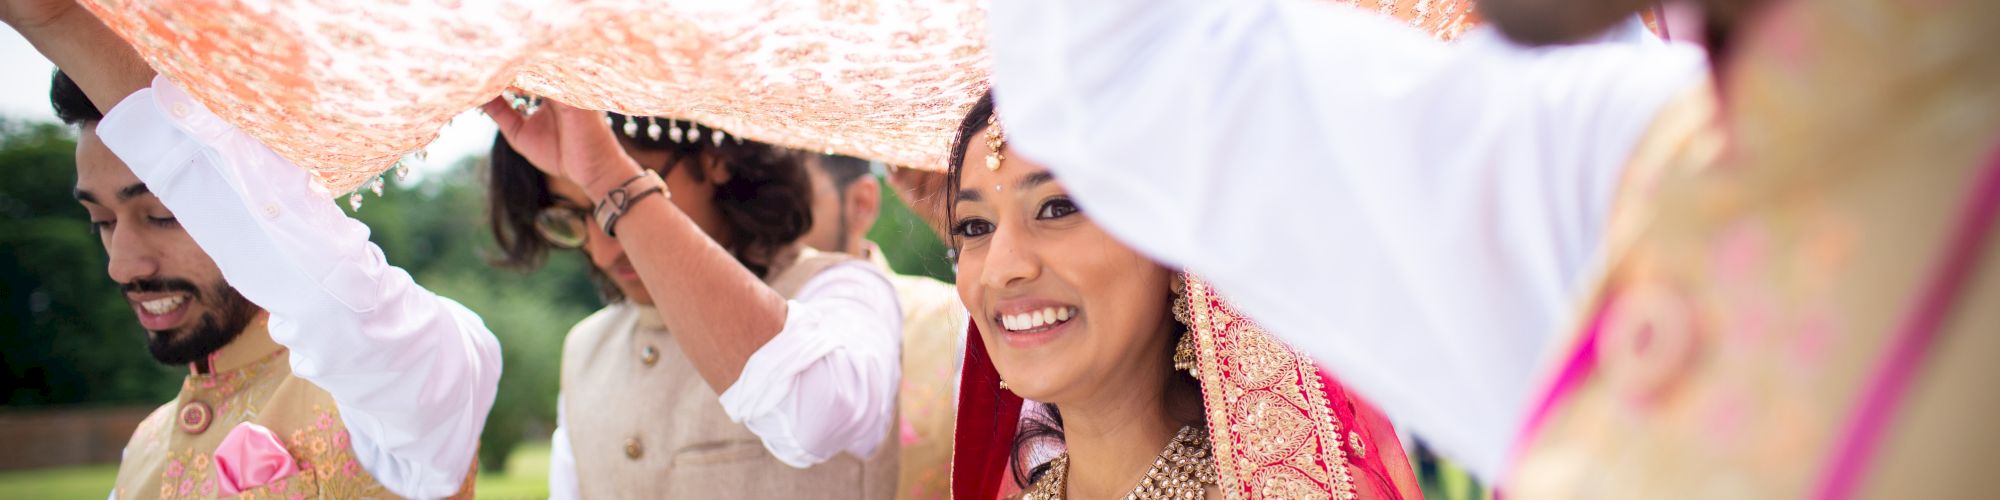 A bride walks under a decorated canopy, smiling, accompanied by three people in traditional attire, during an outdoor celebration or ceremony.